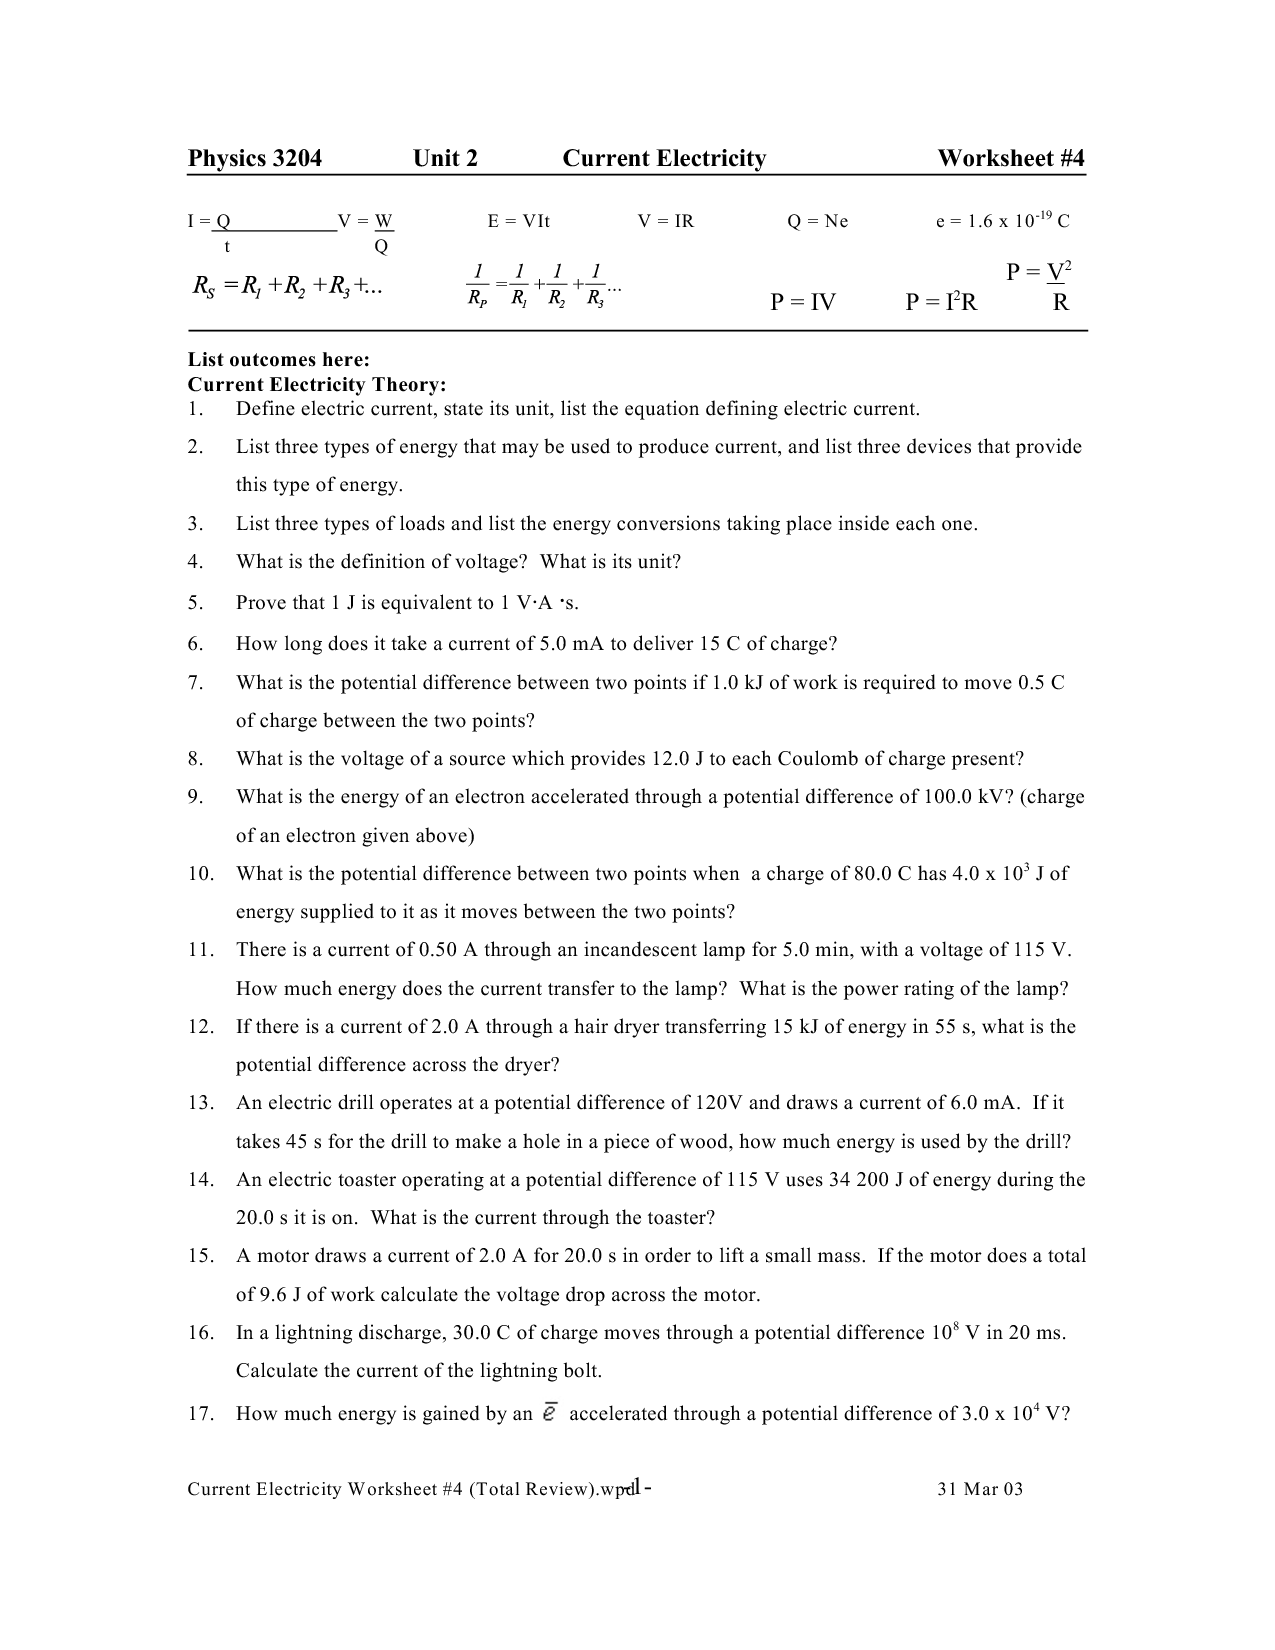 12 Best Images of Physics Unit 1 Worksheet 2 2 Drawing Force Diagrams Worksheet, Current